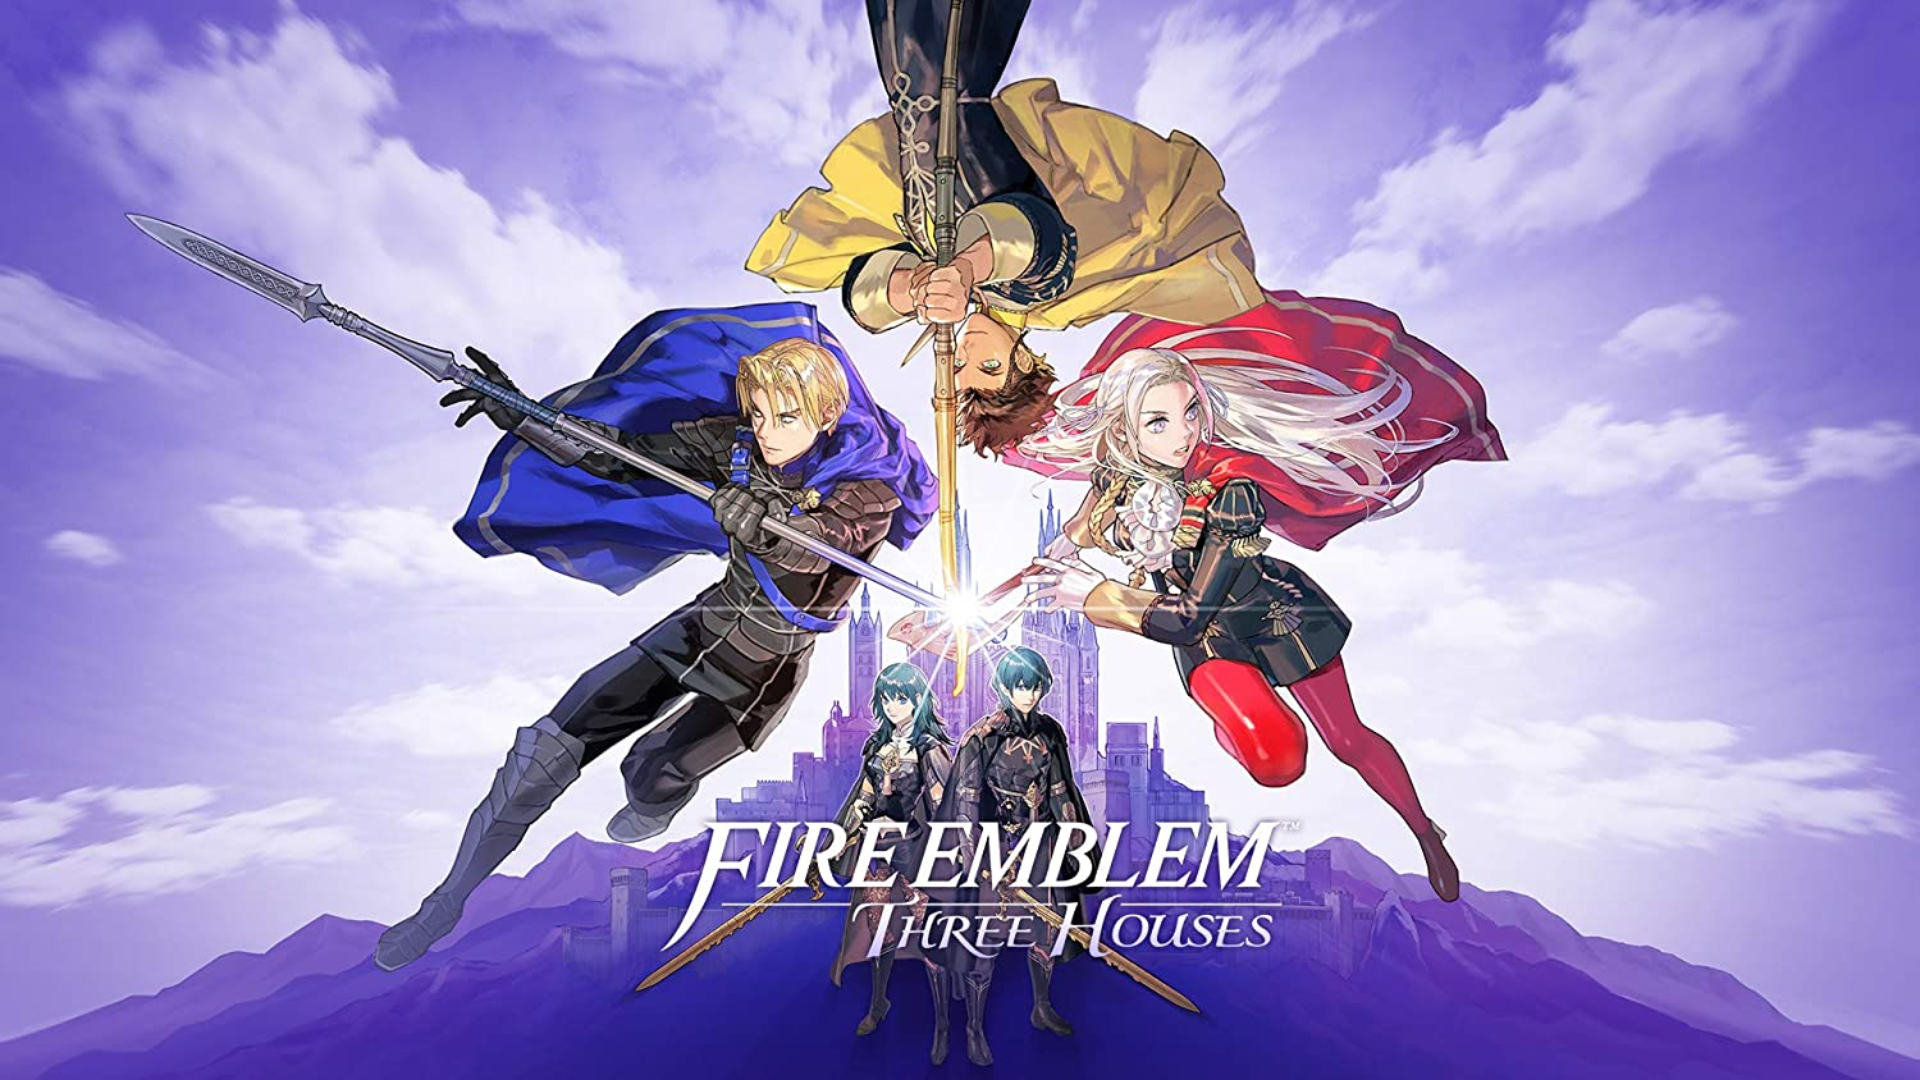 The three house leaders from Fire Emblem: Three Houses